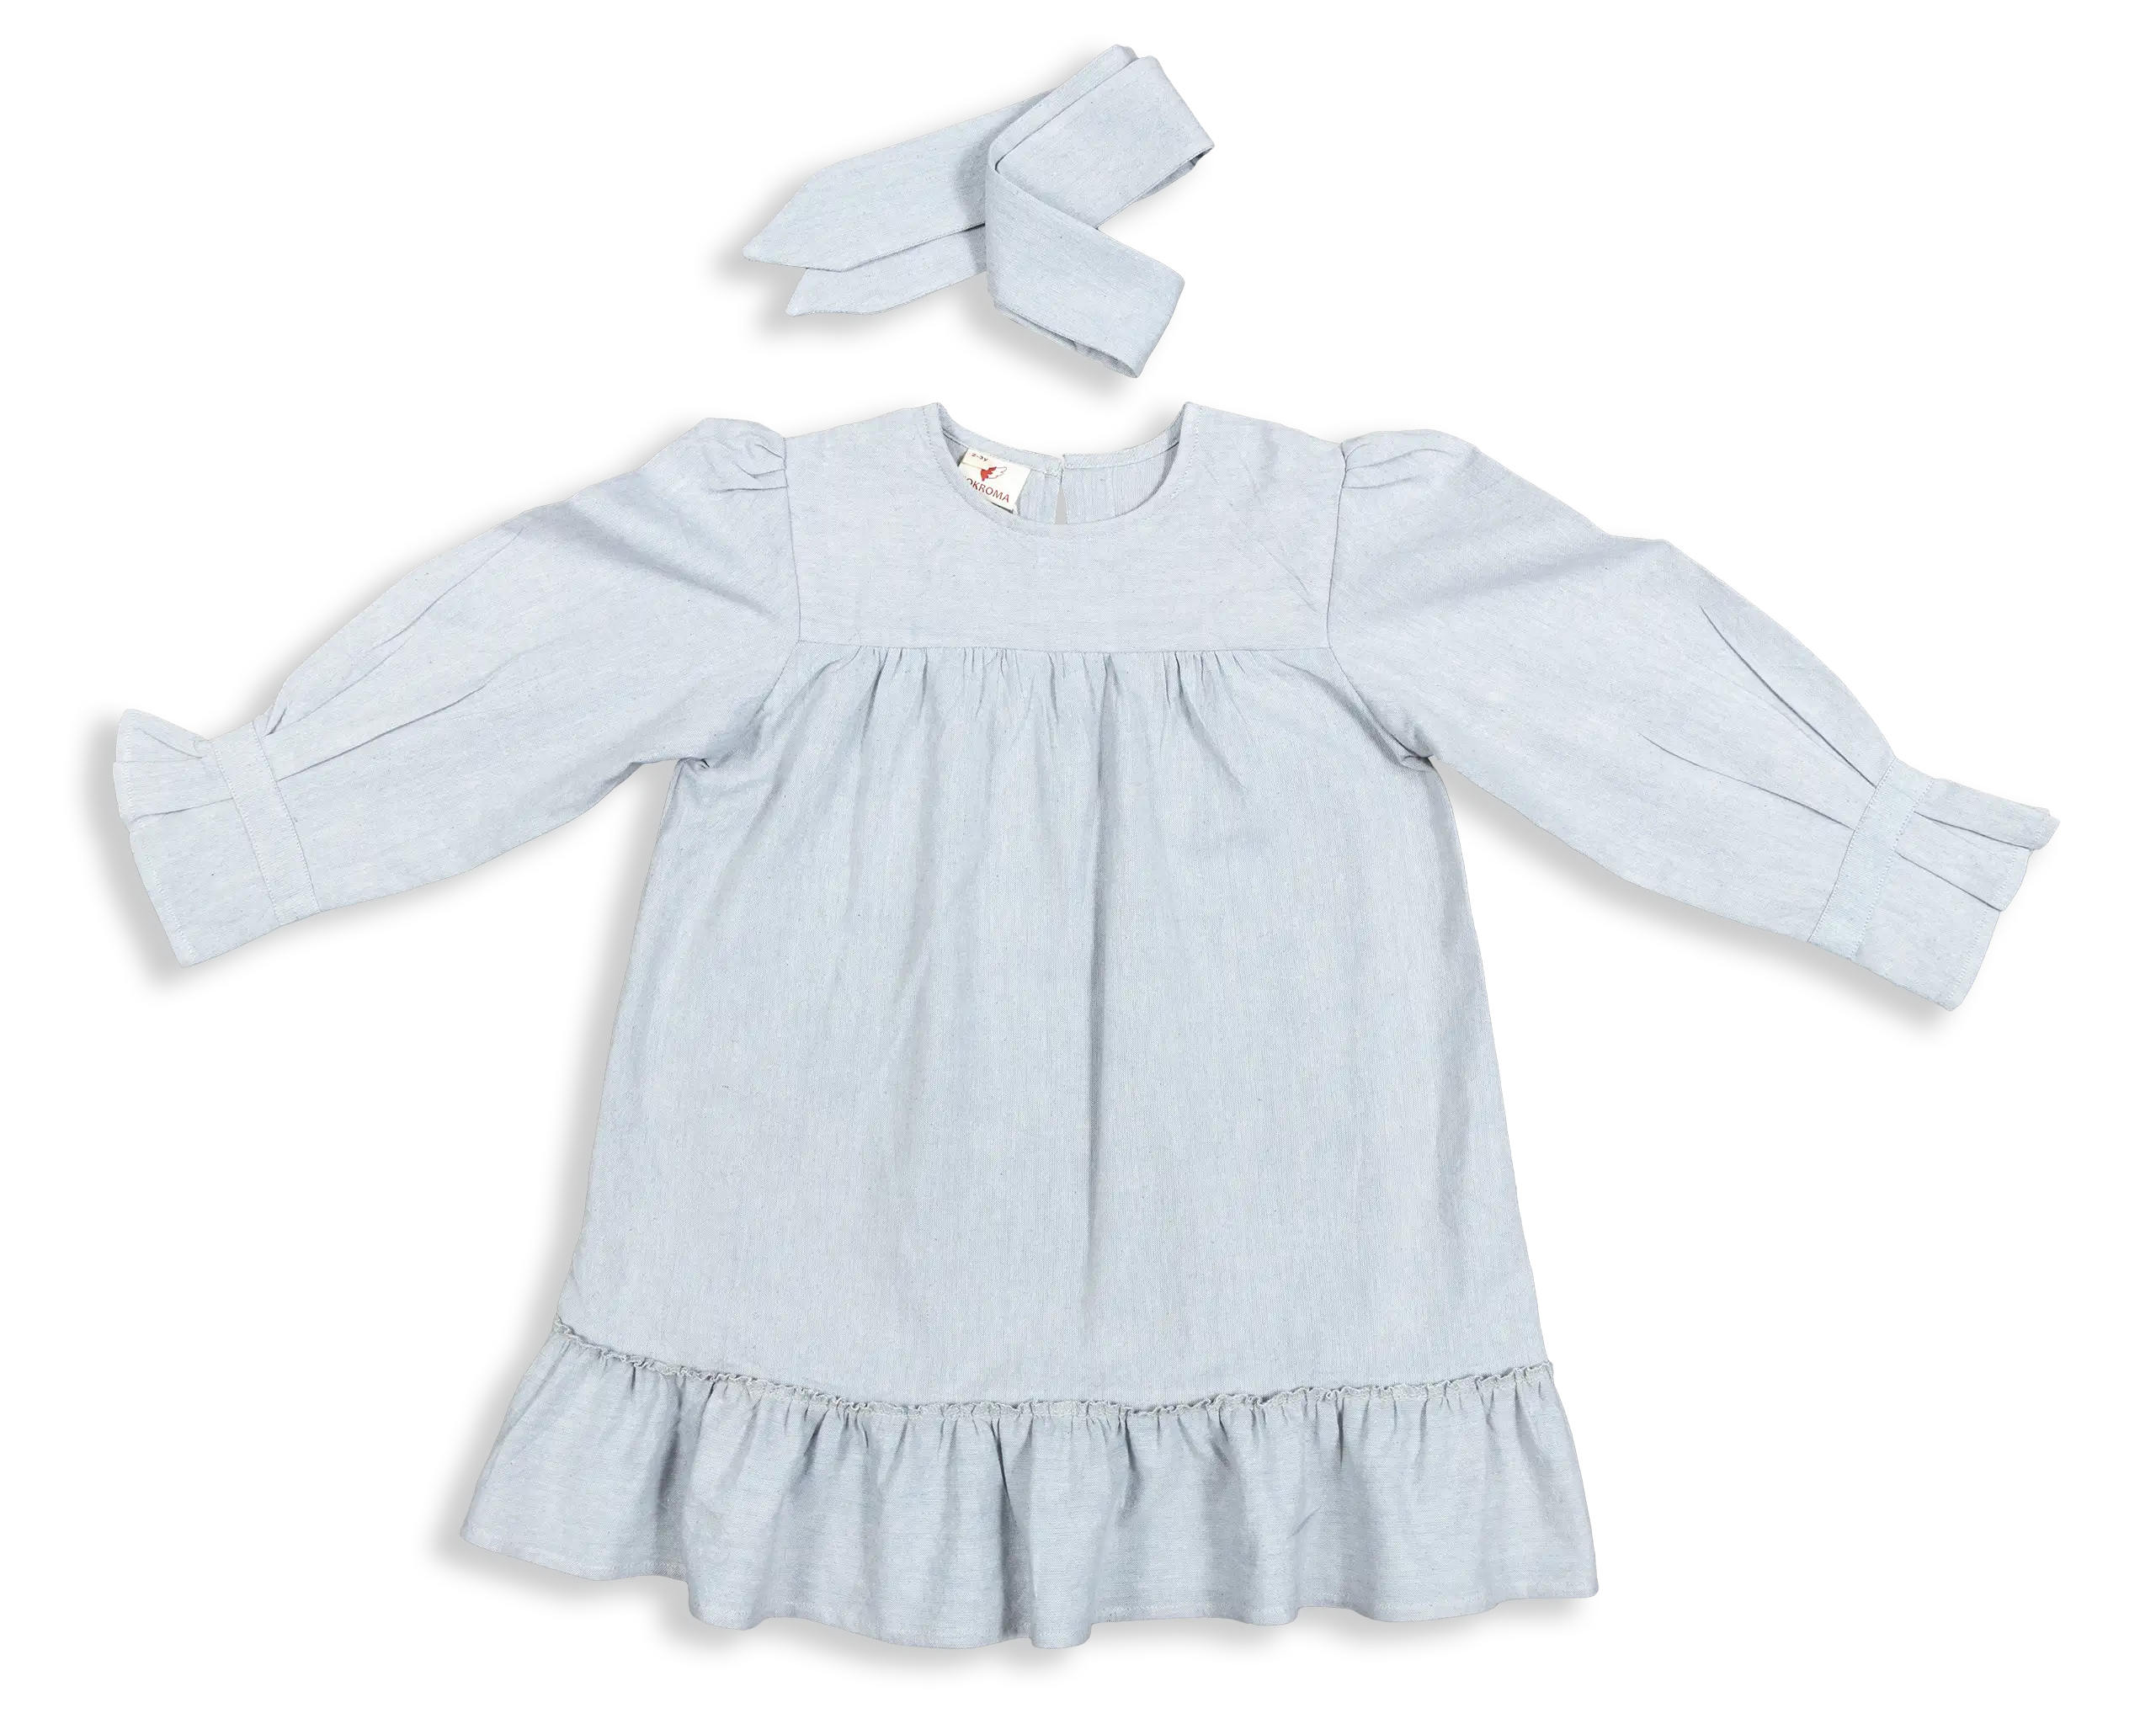 Kokroma's Damini Dress is a sweet addition to our clothing for little girls. With puffed shoulders and gathered cuffs, this warm weather outfit comes with a matching elastic floppy ear hair tie. 